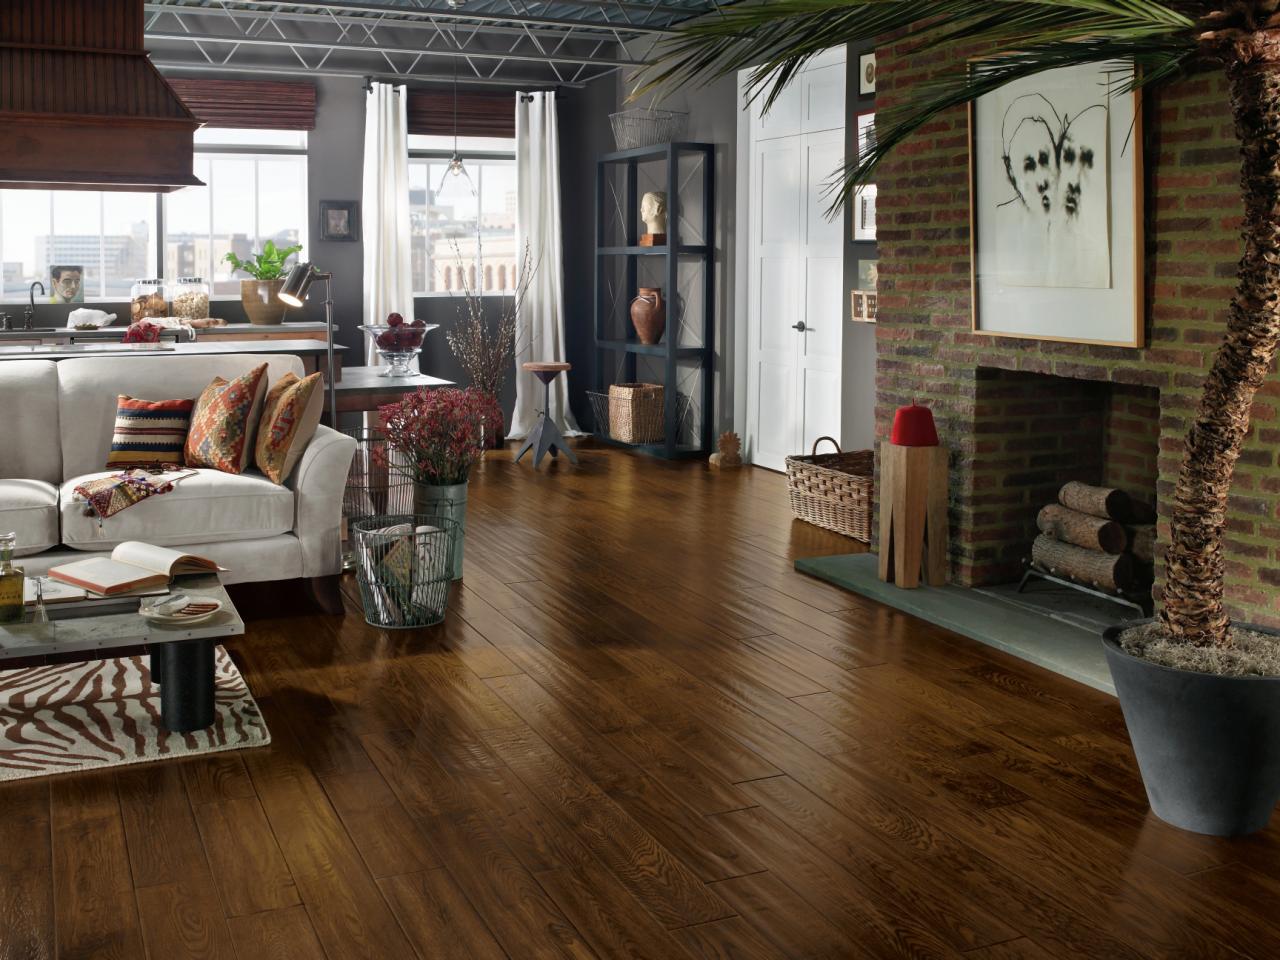 Top Living Room Flooring Options, What Is The Best Option For Flooring